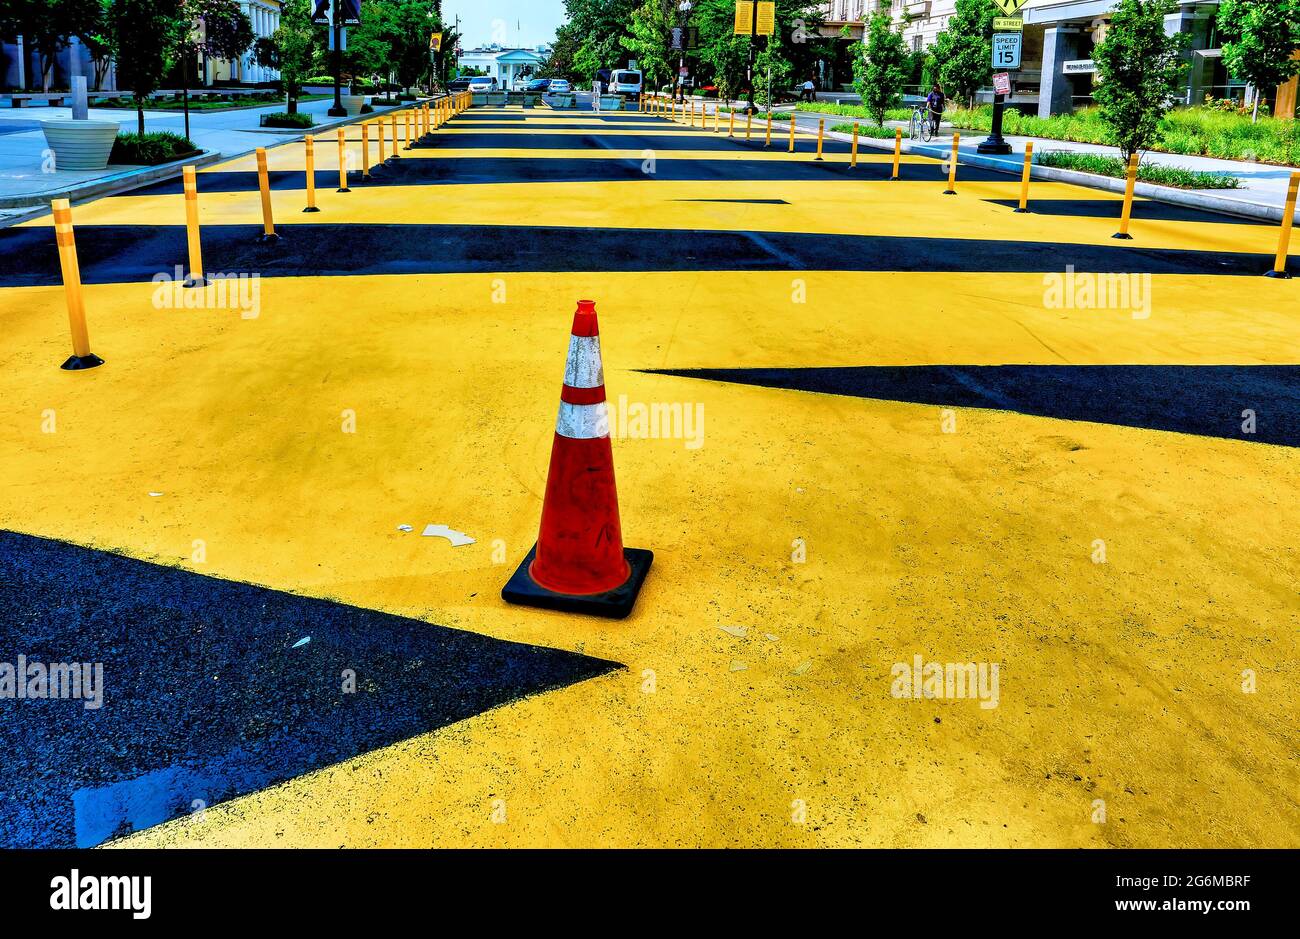 Black and yellow traffic barriers and markings on the street surface at Black Lives Matter Plaza in Washington D.C. Stock Photo